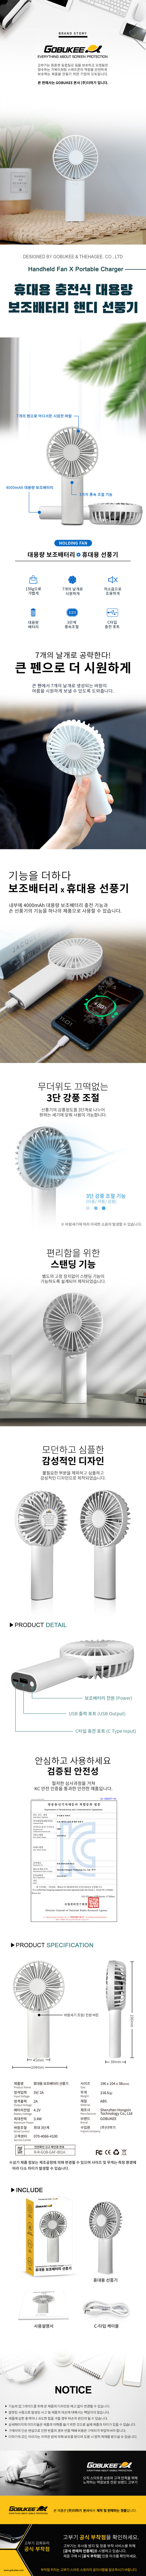 Handheld-Fan_Portable-Charger_page_Smart.jpg